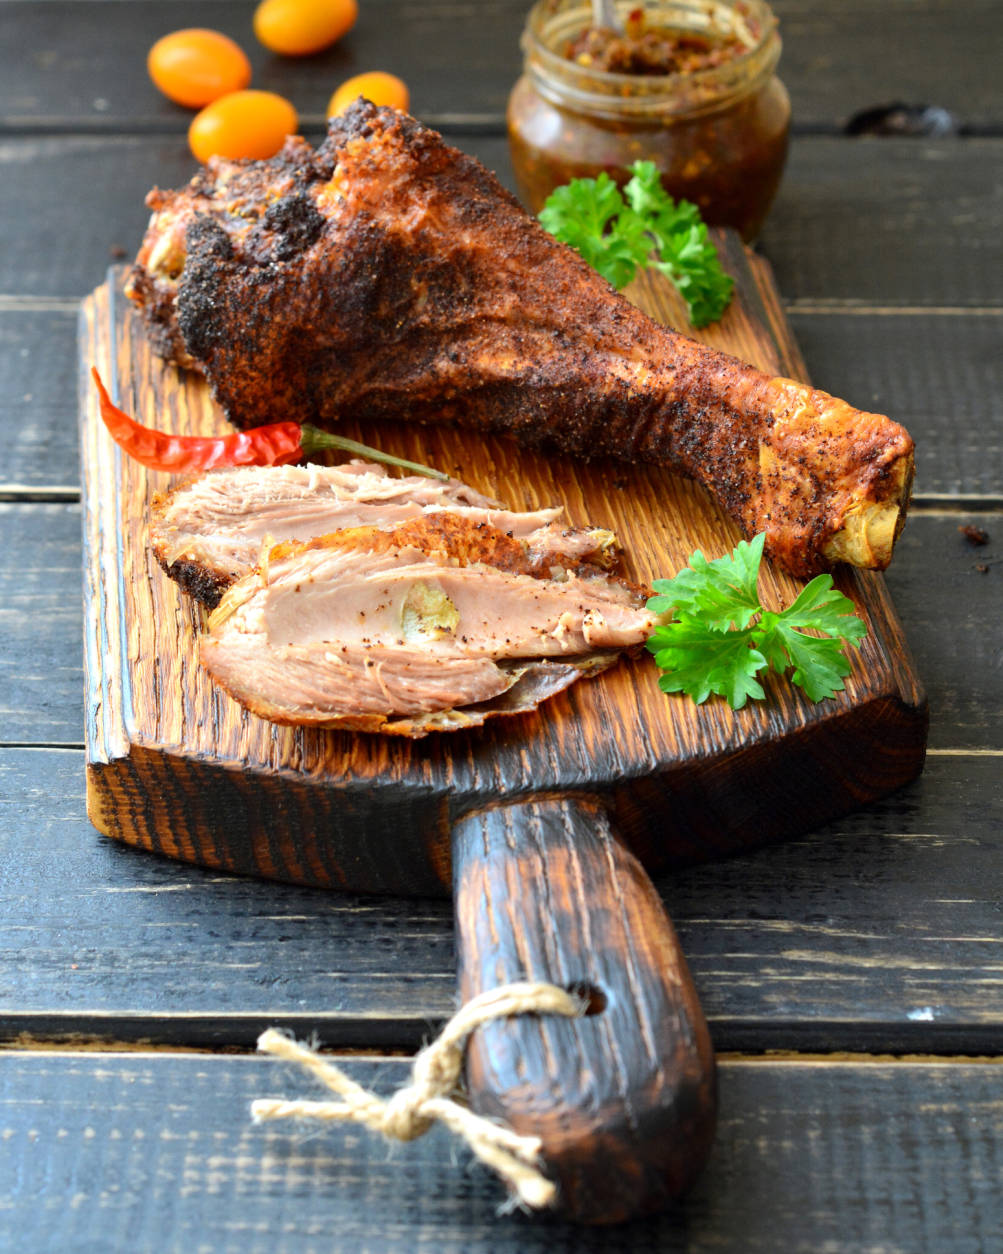 Roast turkey drumstick on a dark wooden table with tomatoes, herbs and spicy sauce